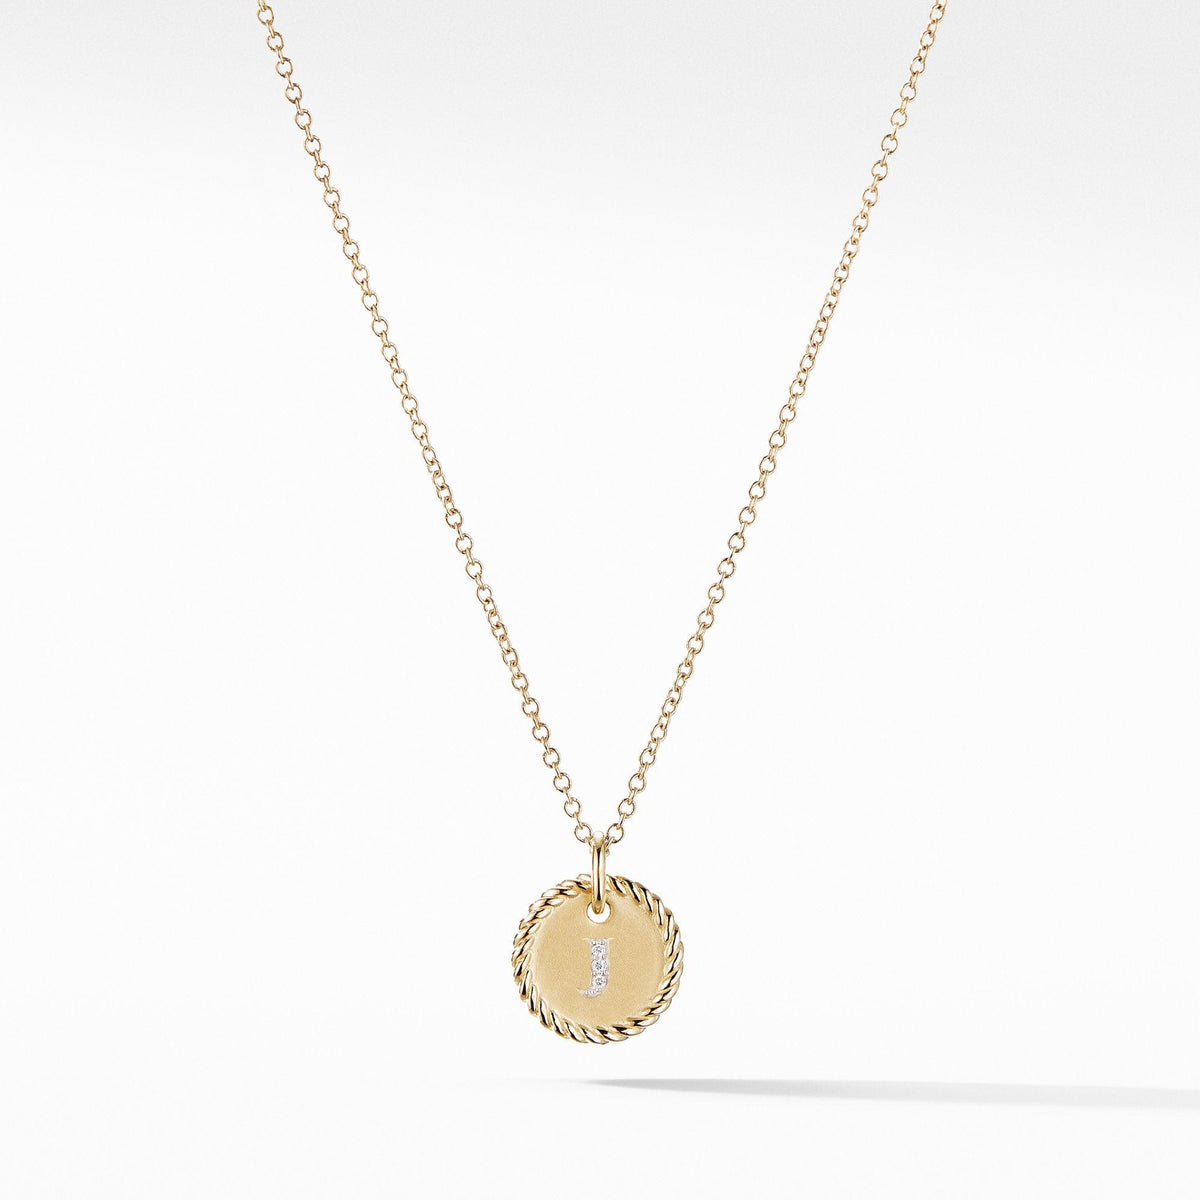 "J" Pendant with Diamonds in Gold on Chain